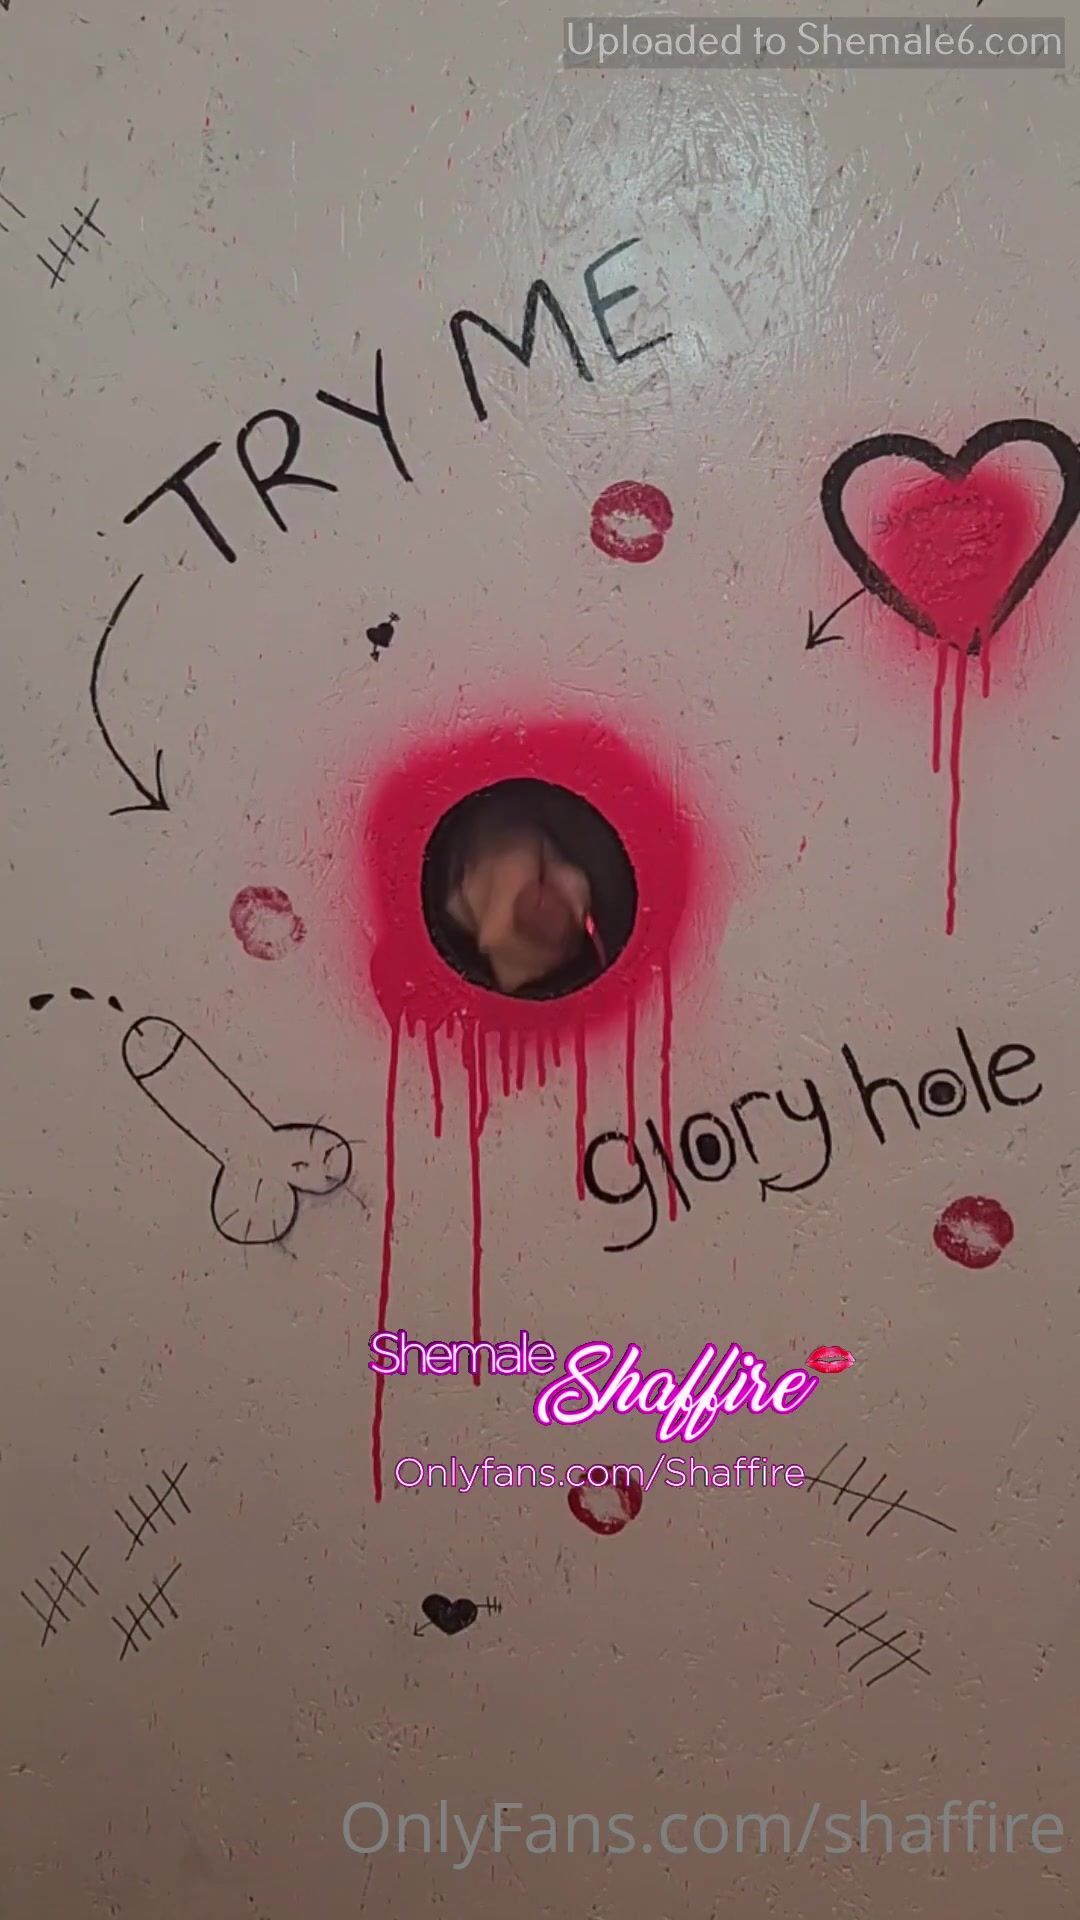 Shaffire You Voted For Here Cumming Though Glory Hole Like This